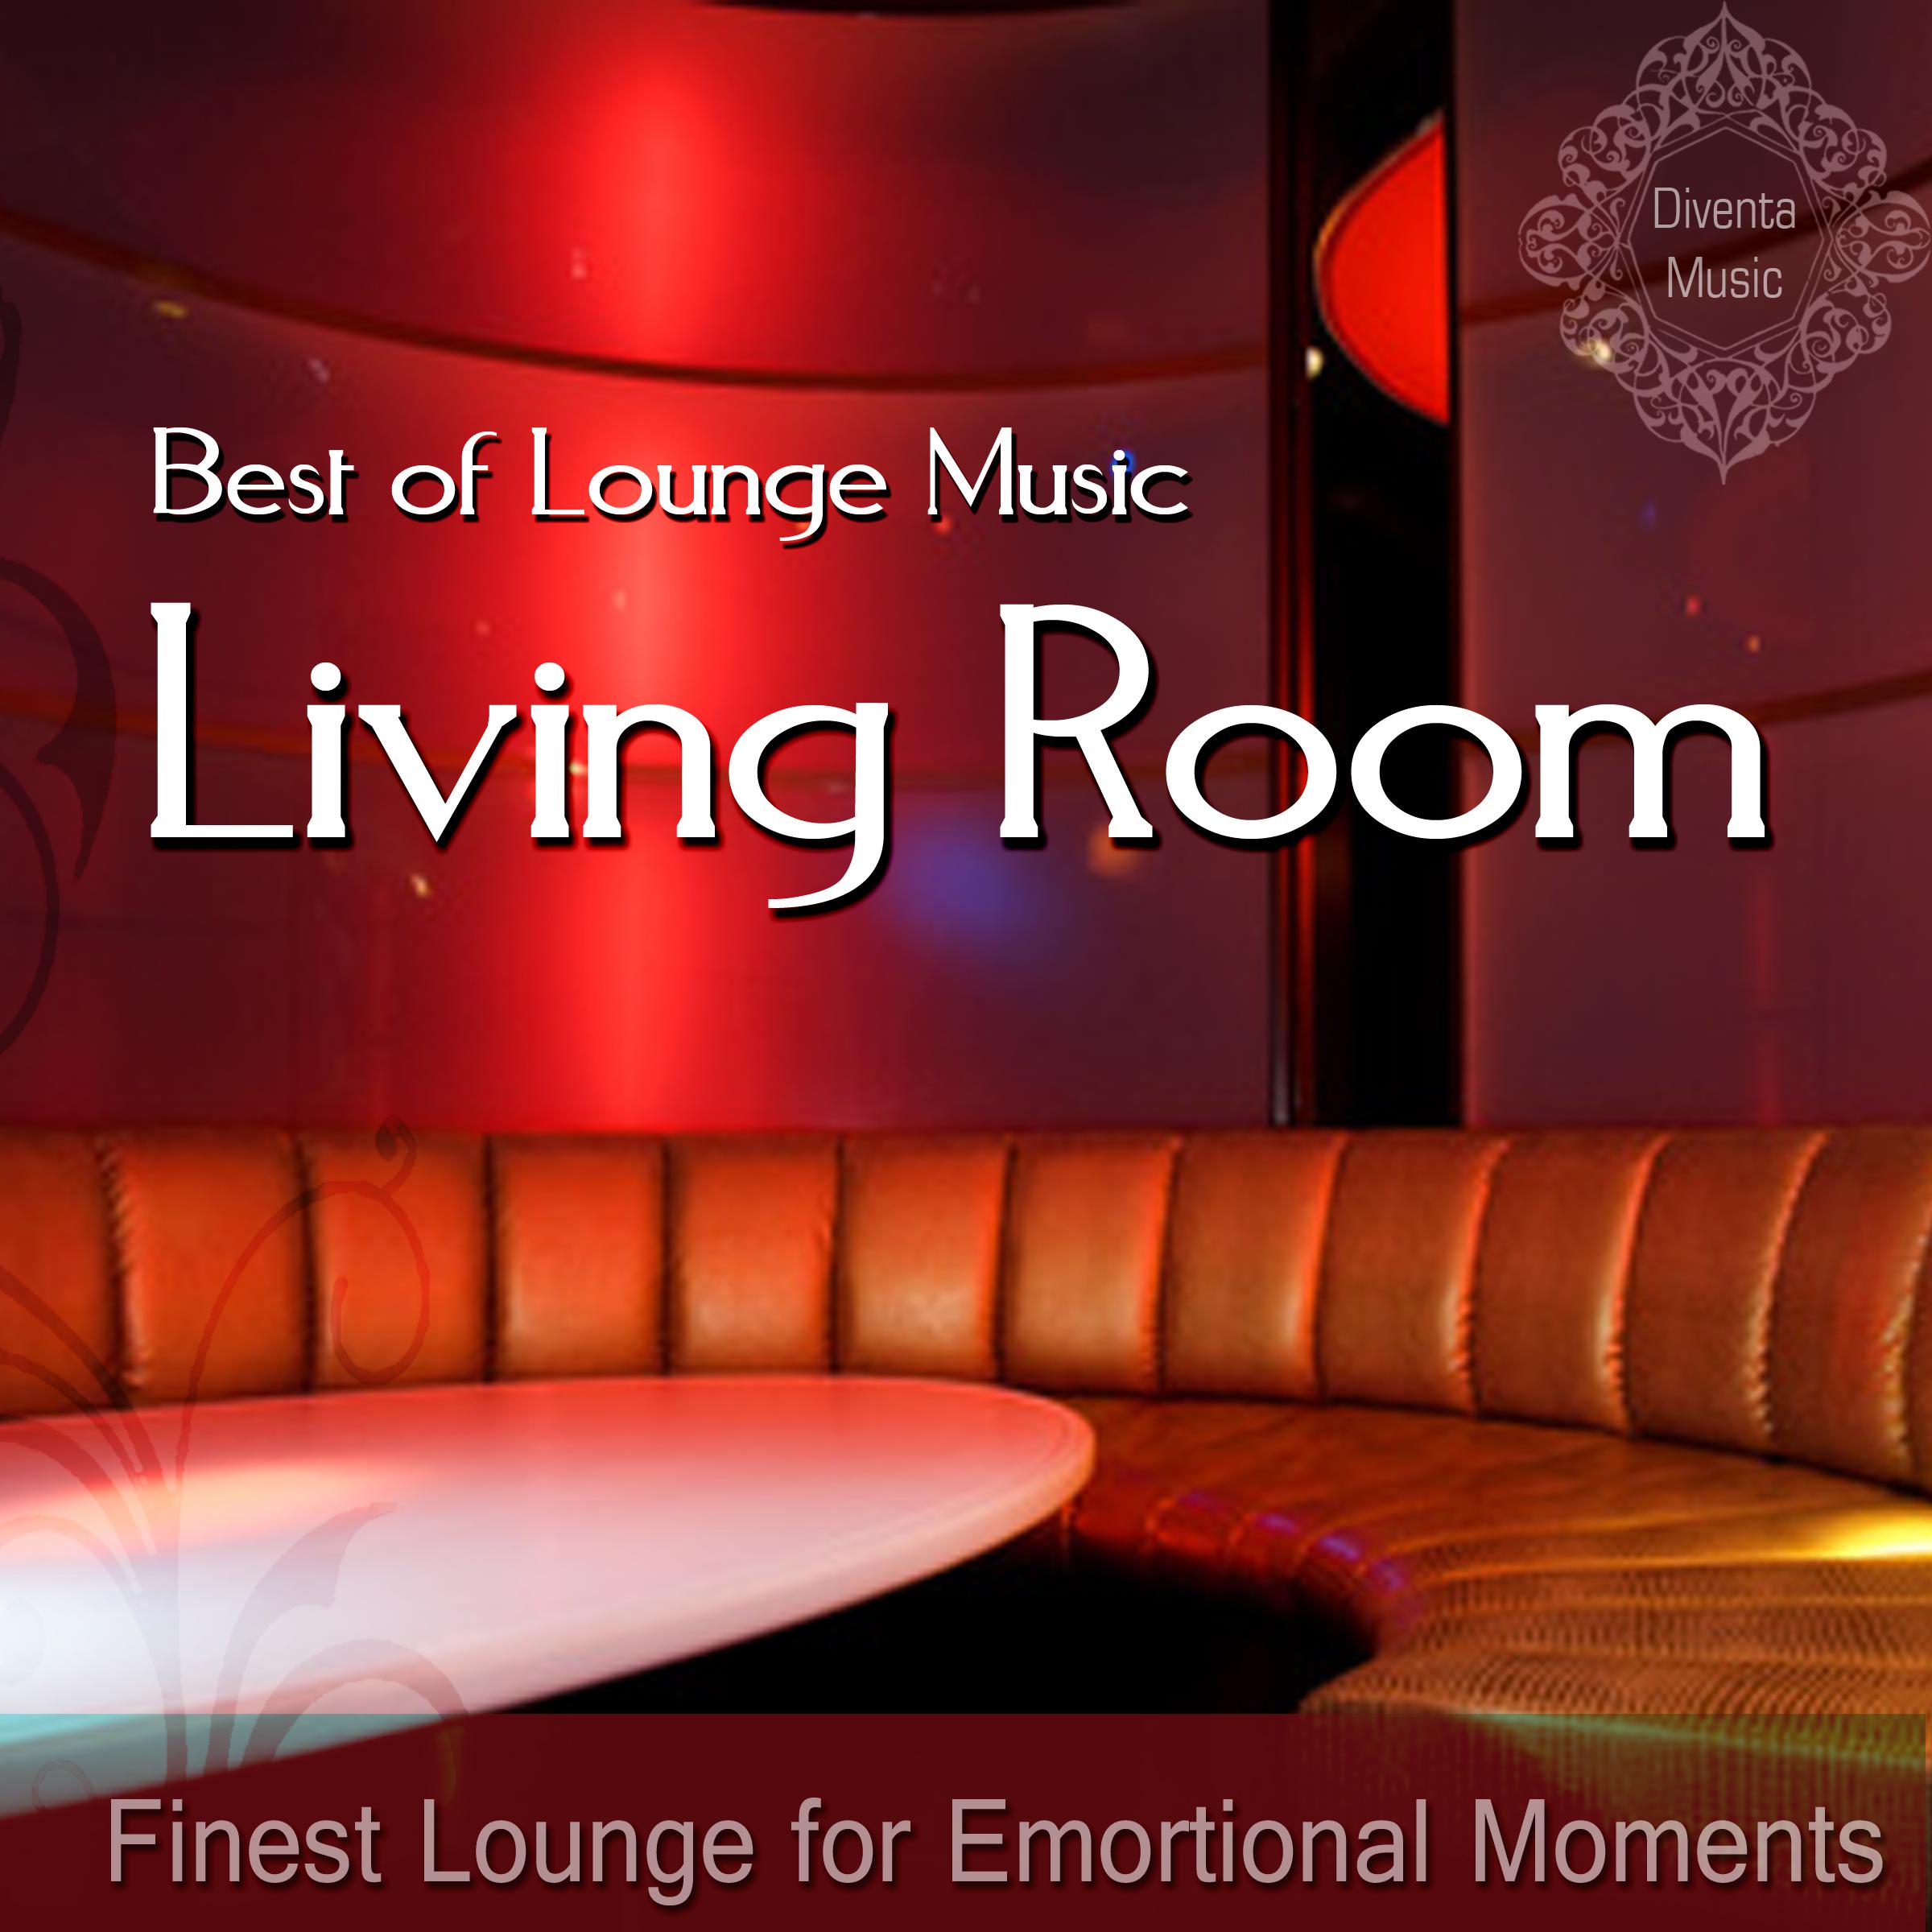 Best of Lounge Music (Finest Lounge for Emotional Moments)